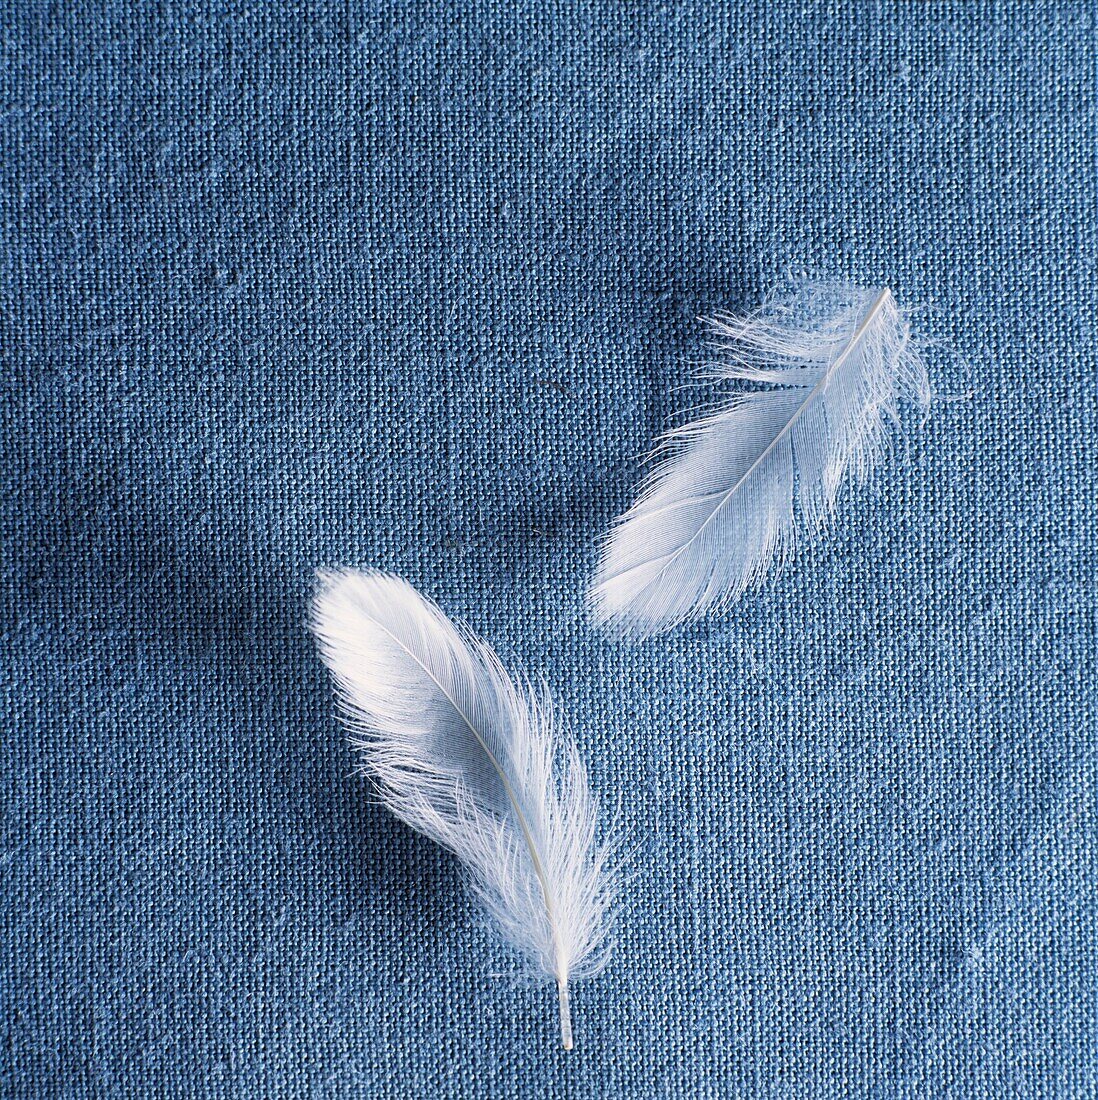 Two feathers on blue textured fabric